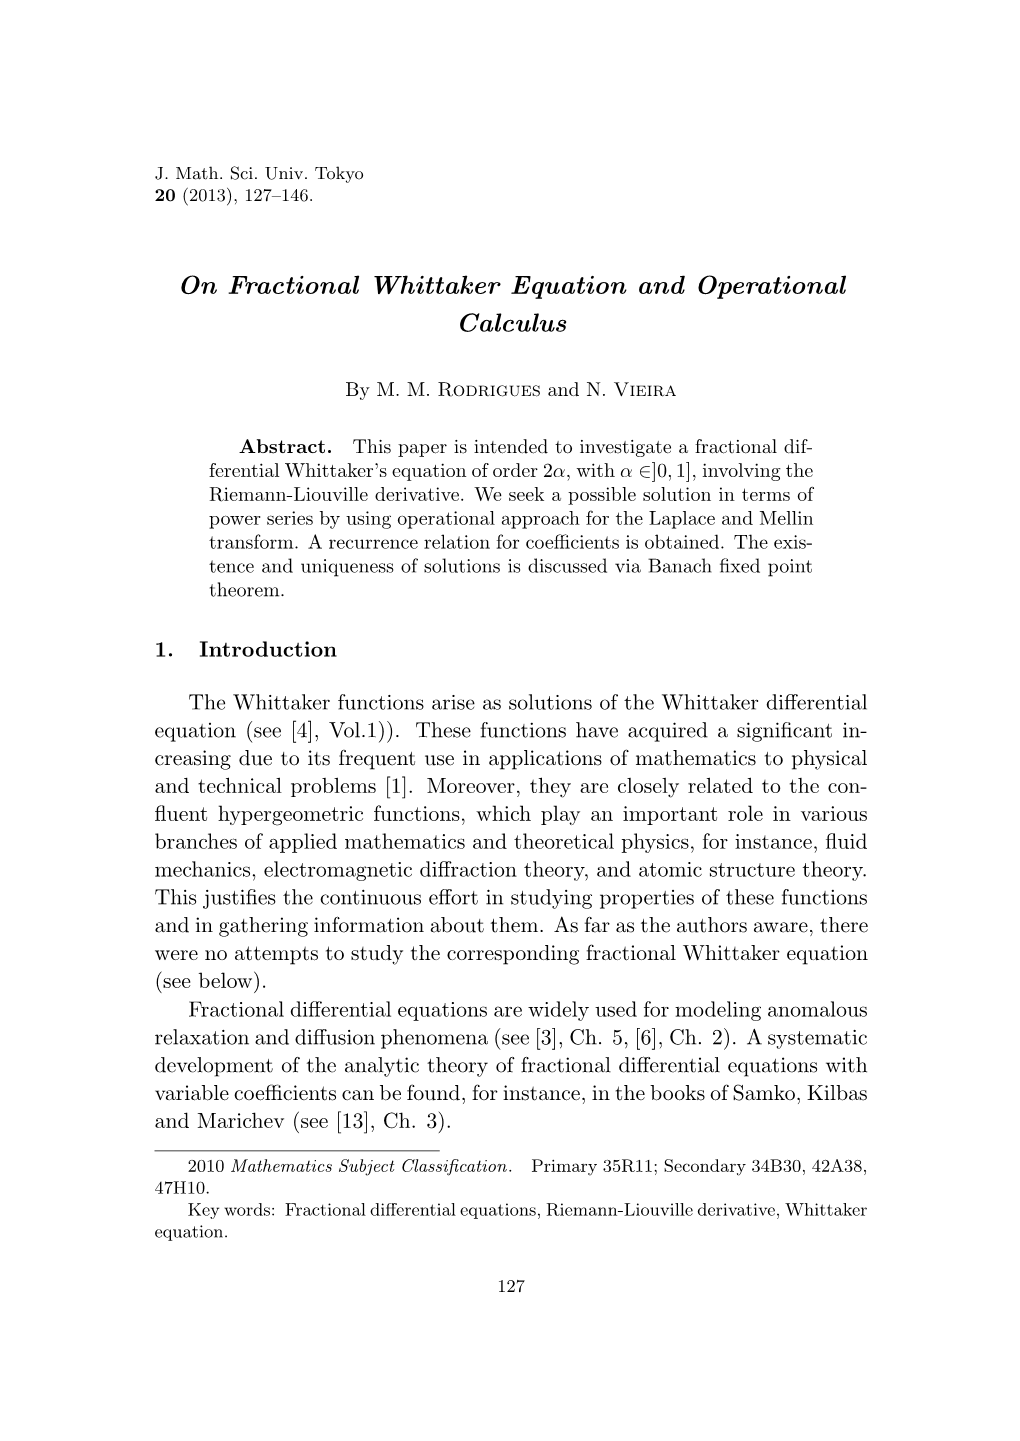 On Fractional Whittaker Equation and Operational Calculus